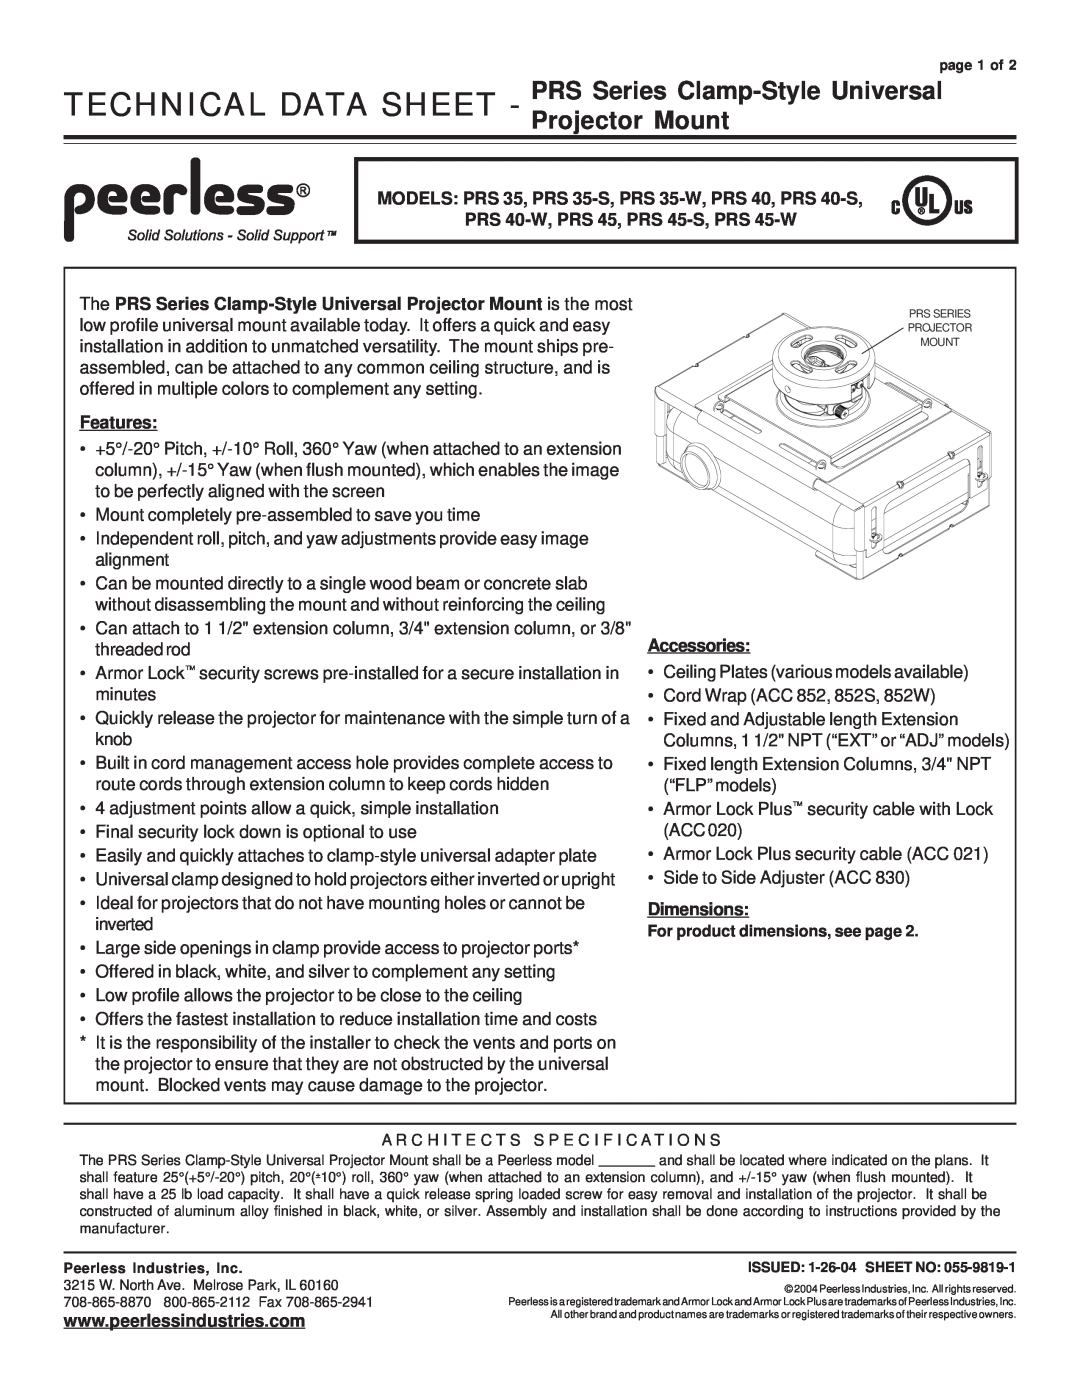 Peerless Industries PRS 45-S, PRS 45-W, PRS 40-W, PRS 35-W, PRS 35-S specifications Features, Accessories, Dimensions 